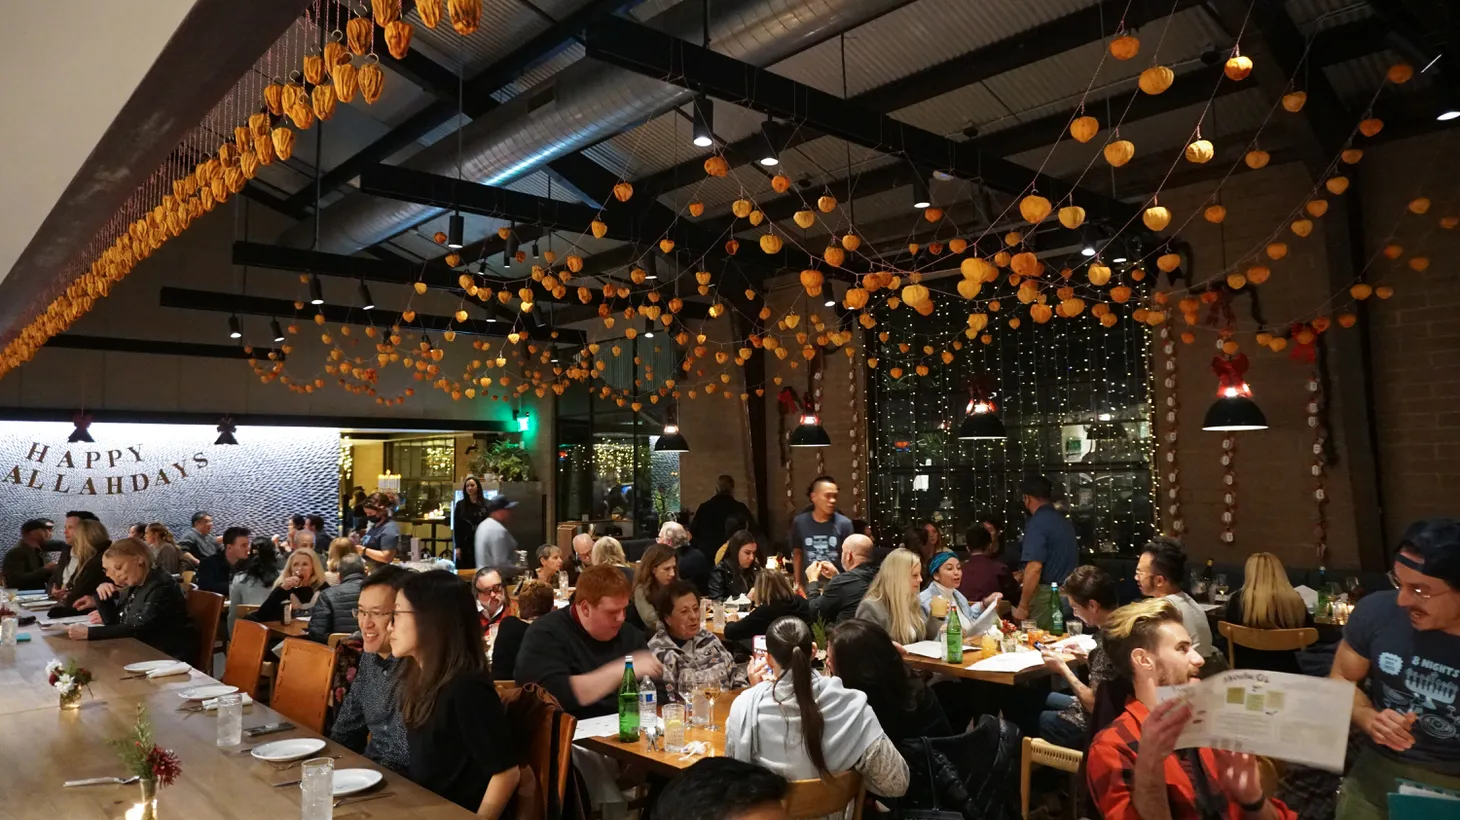 Hundreds of persimmons hang from the rafters of Birdie G's in Santa Monica, in the tradition of hoshigaki.